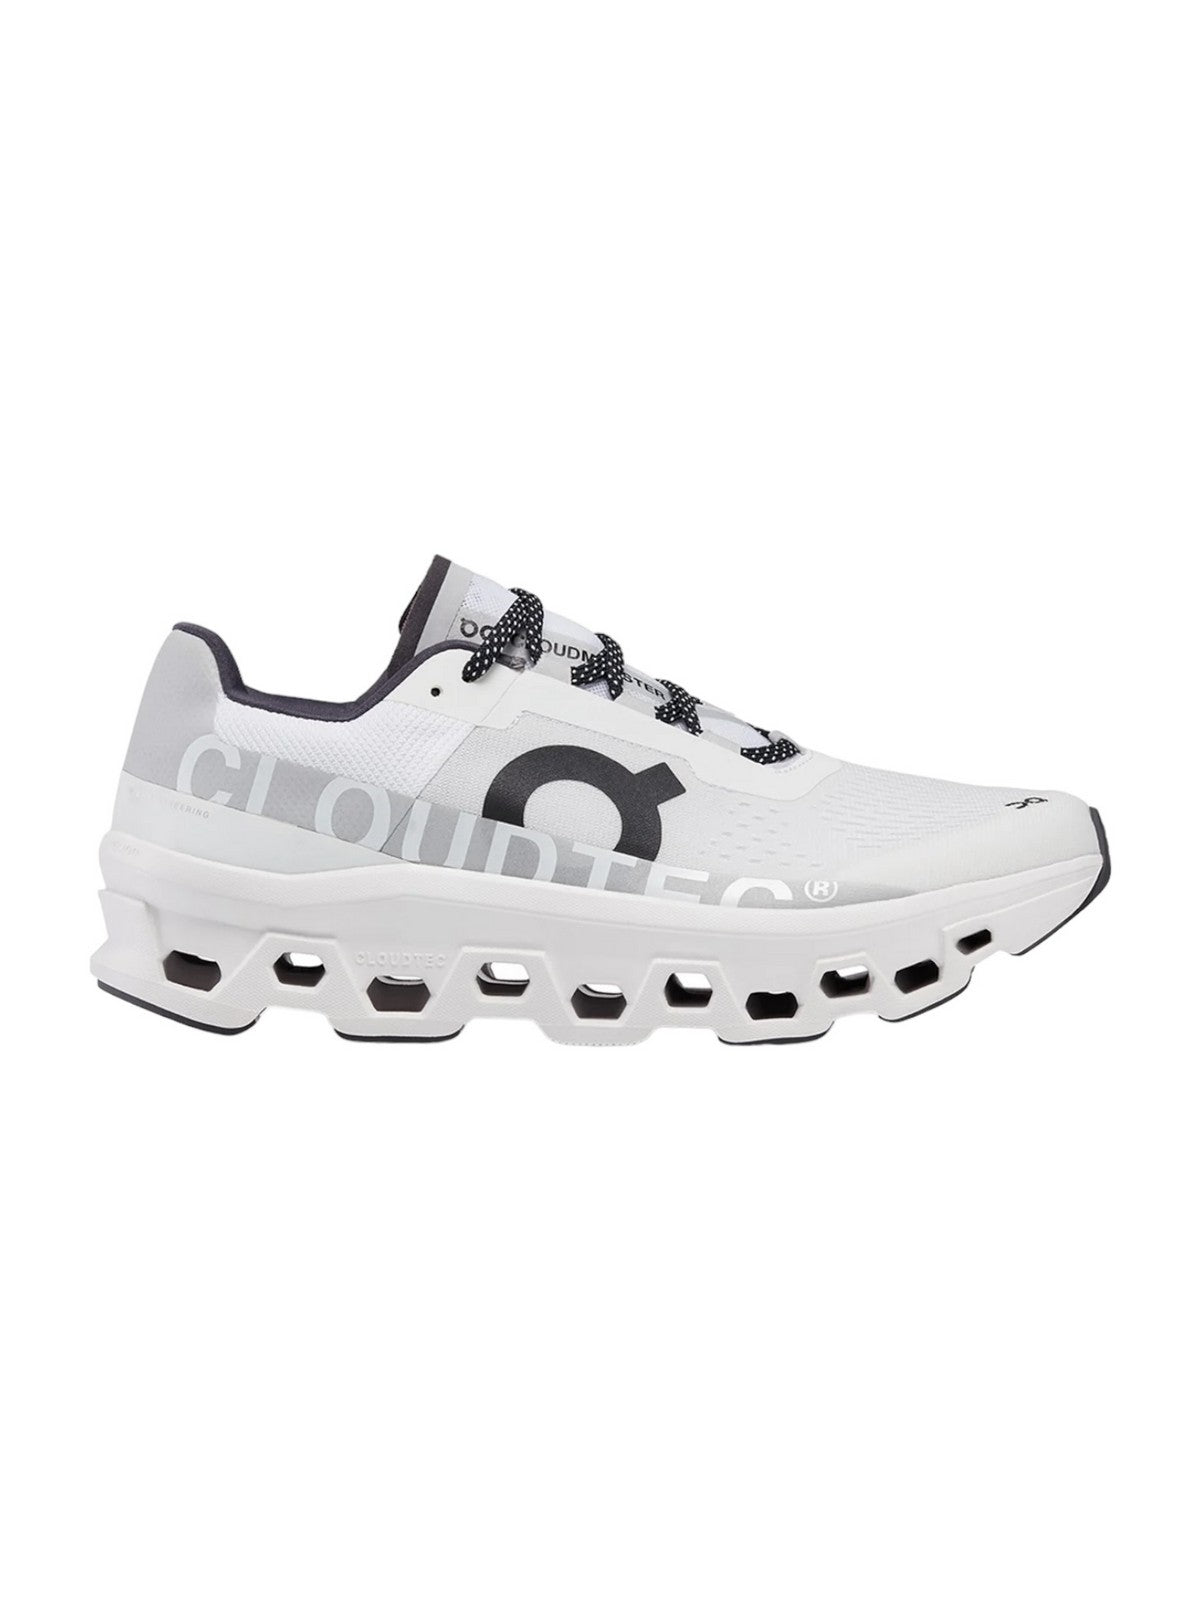 ON Cloudmonster Chaussures pour hommes 61.98434 Blanc